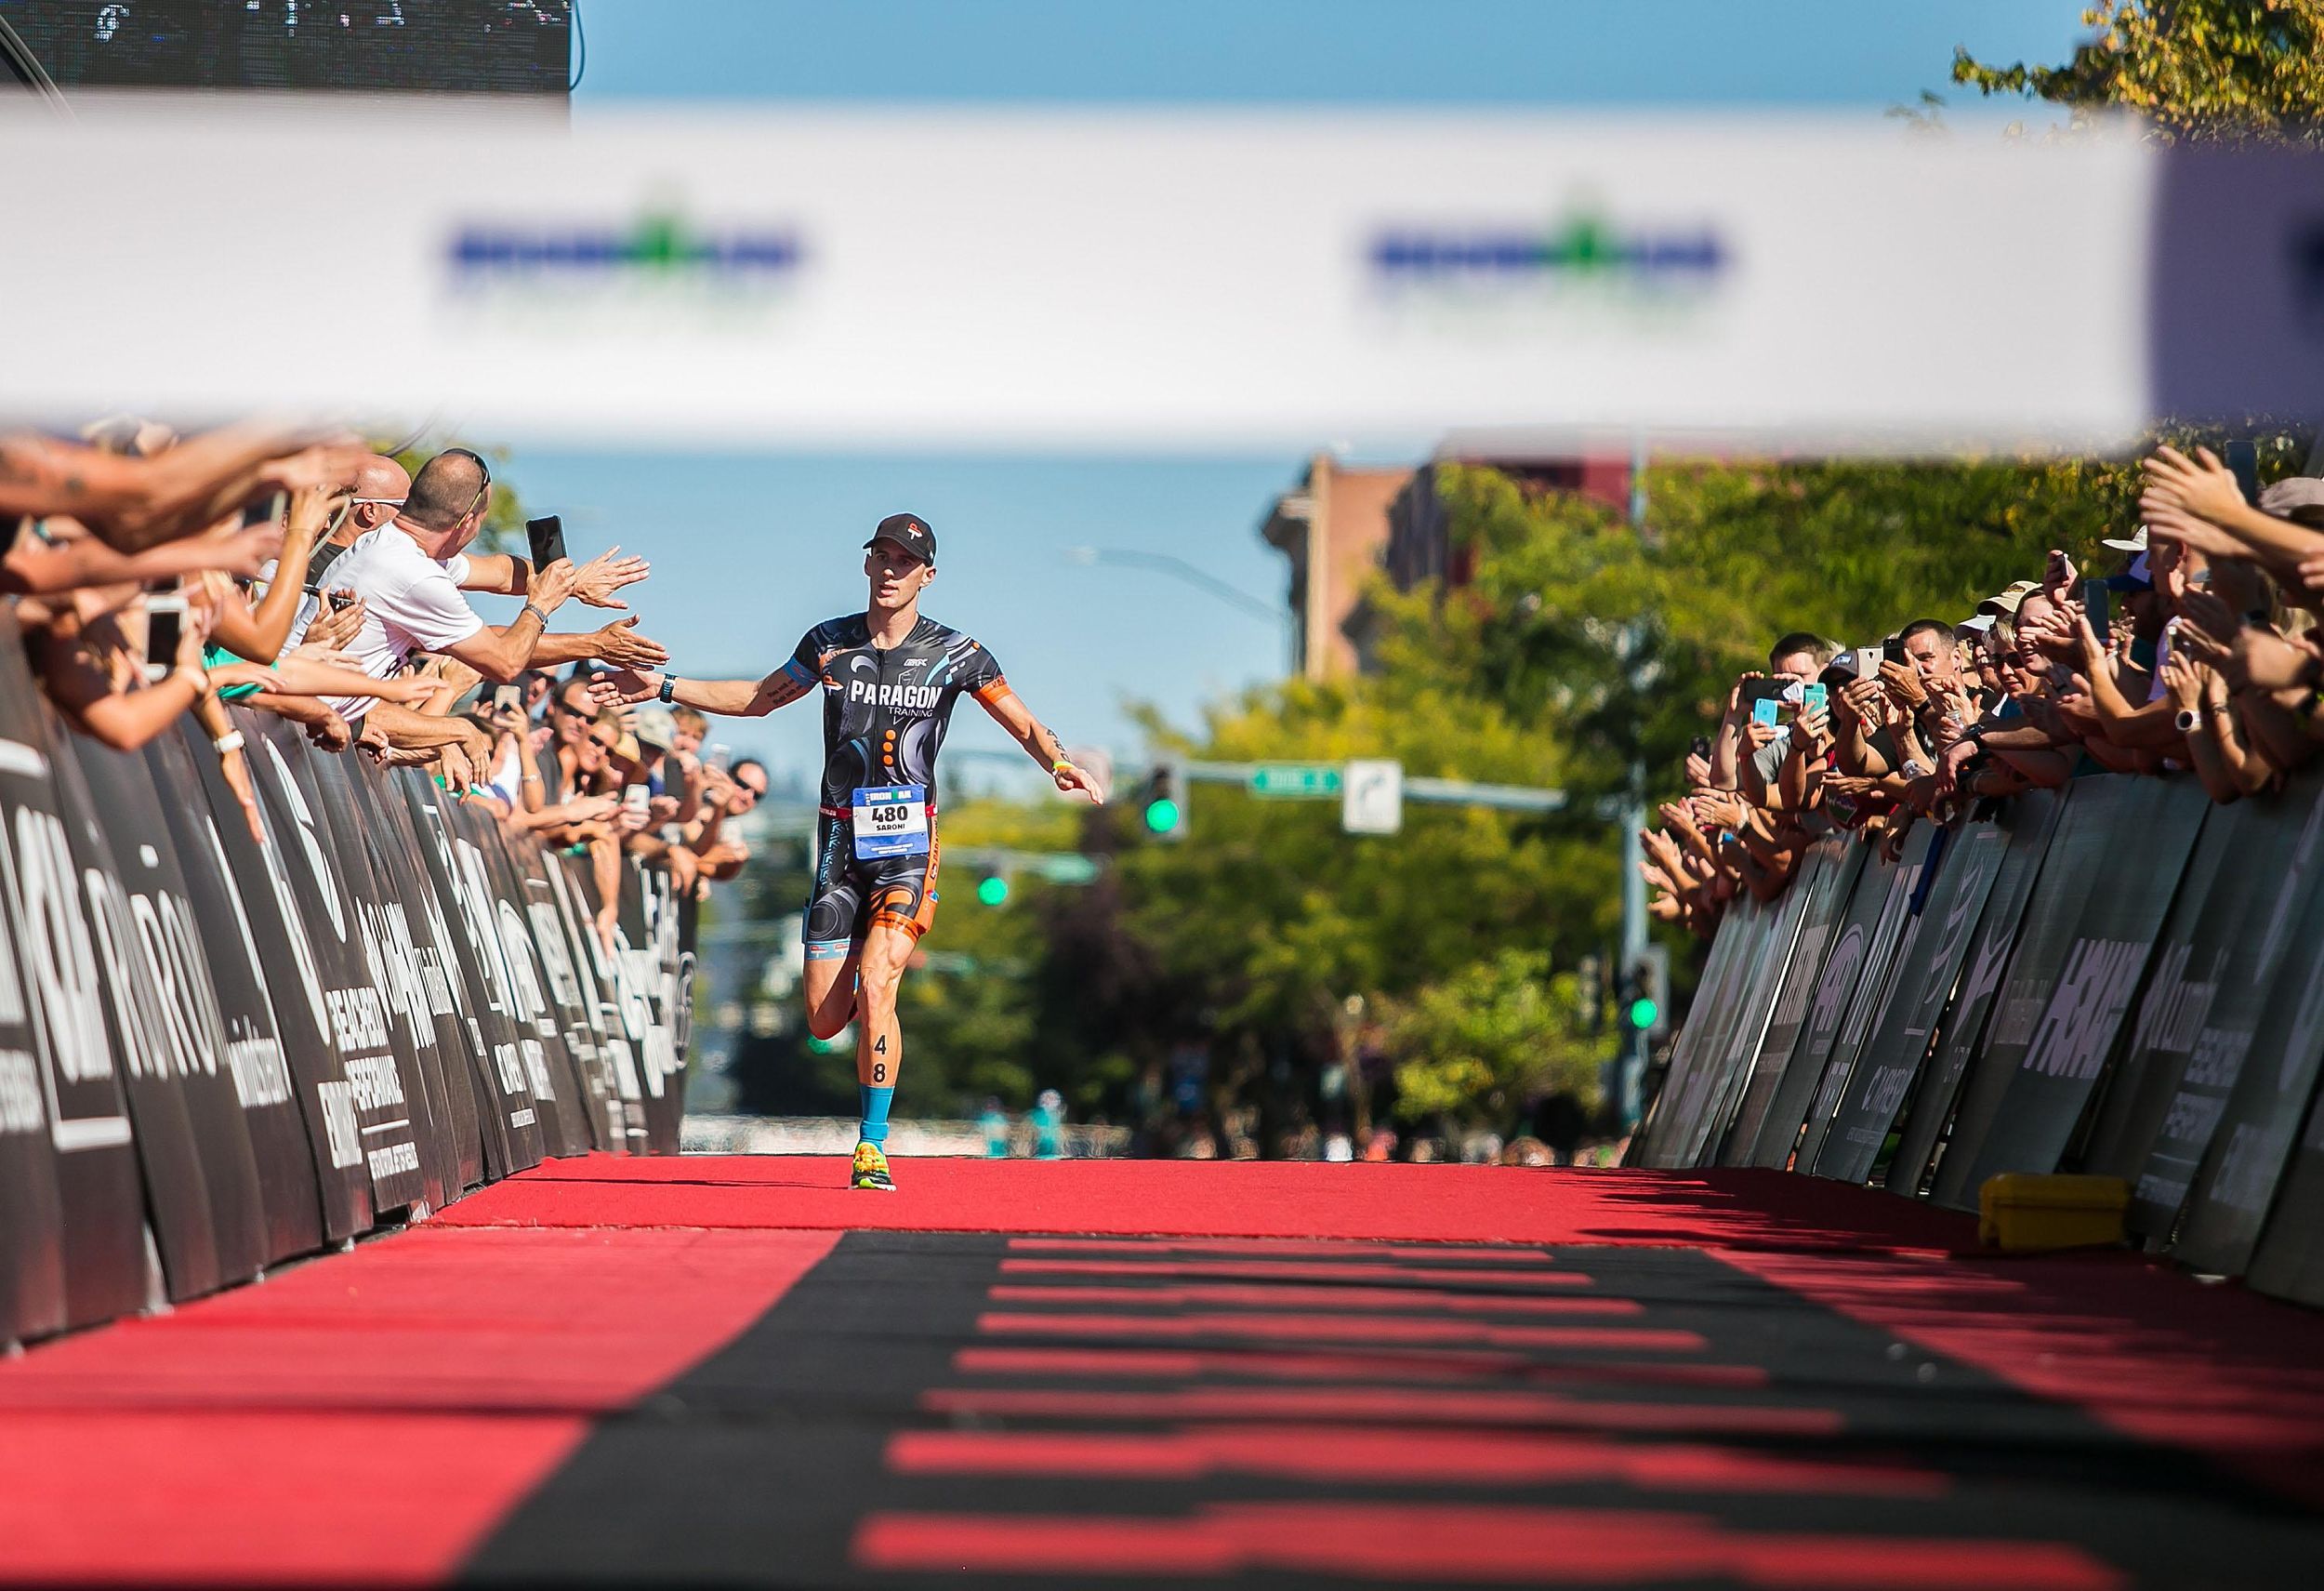 Ironman returns Coeur d’Alene City Council votes to bring full